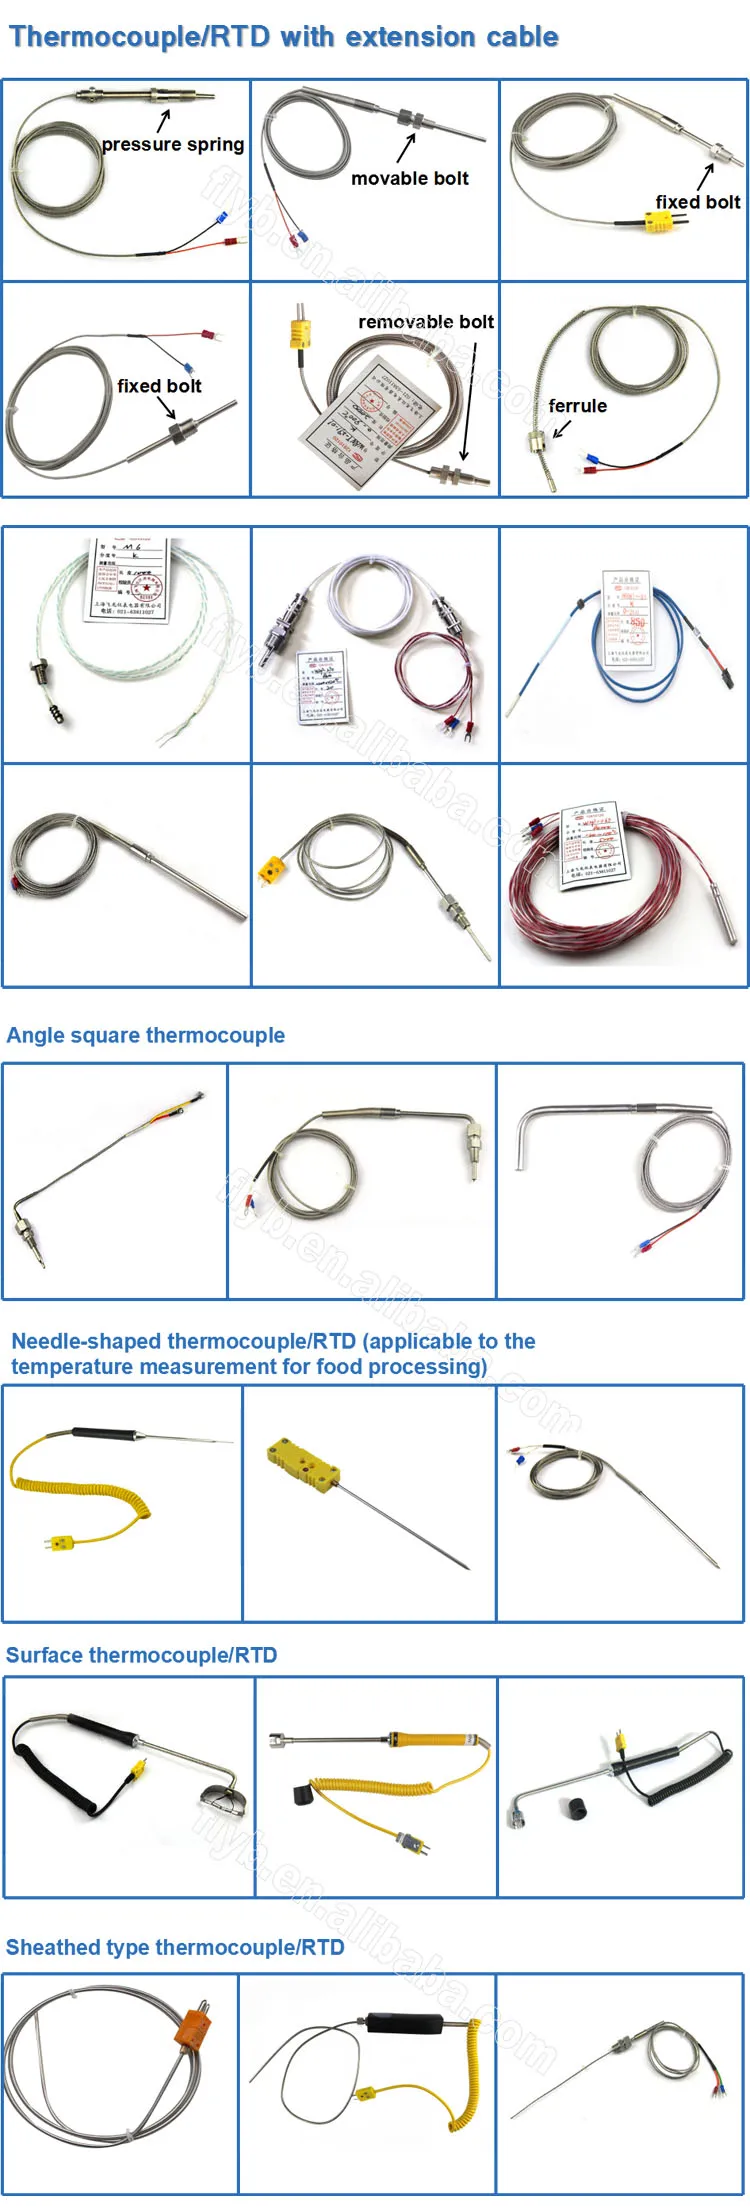 WZP - 291 input pipe temperature sensor Pt100 thermal resistance RTD with shielded wire